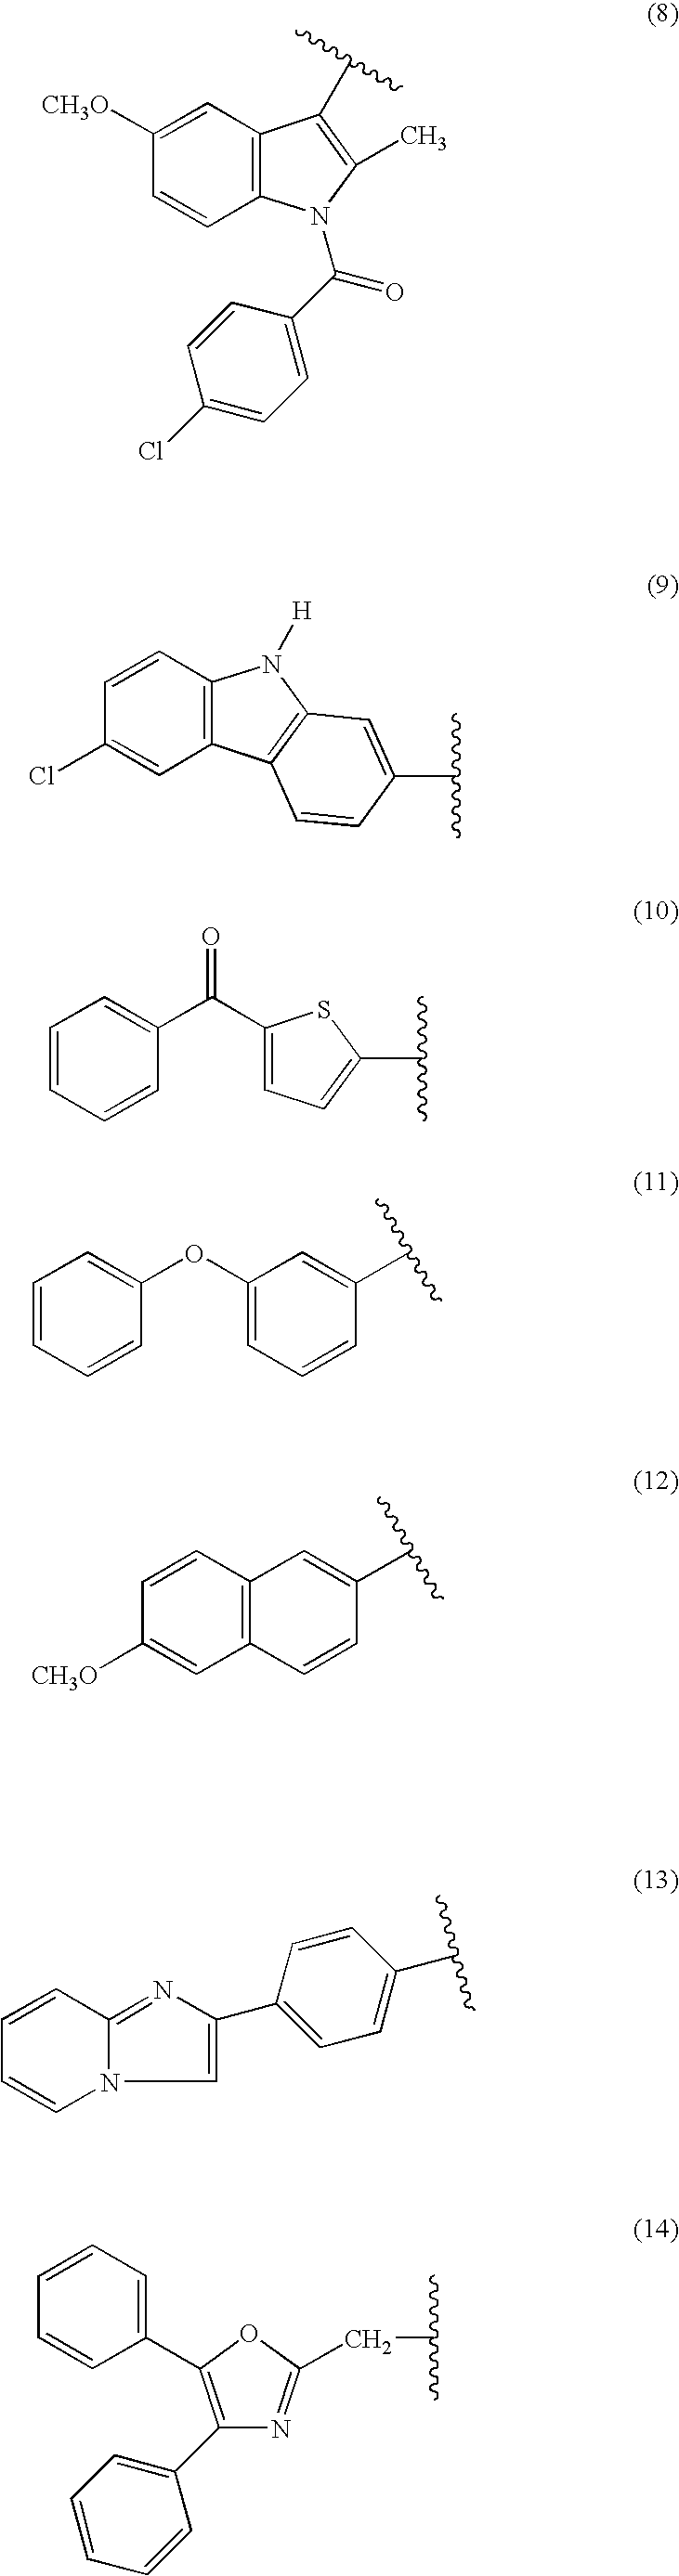 Organic nitric oxide donor salts of nonsteroidal antiinflammatory compounds, compositions and methods of use